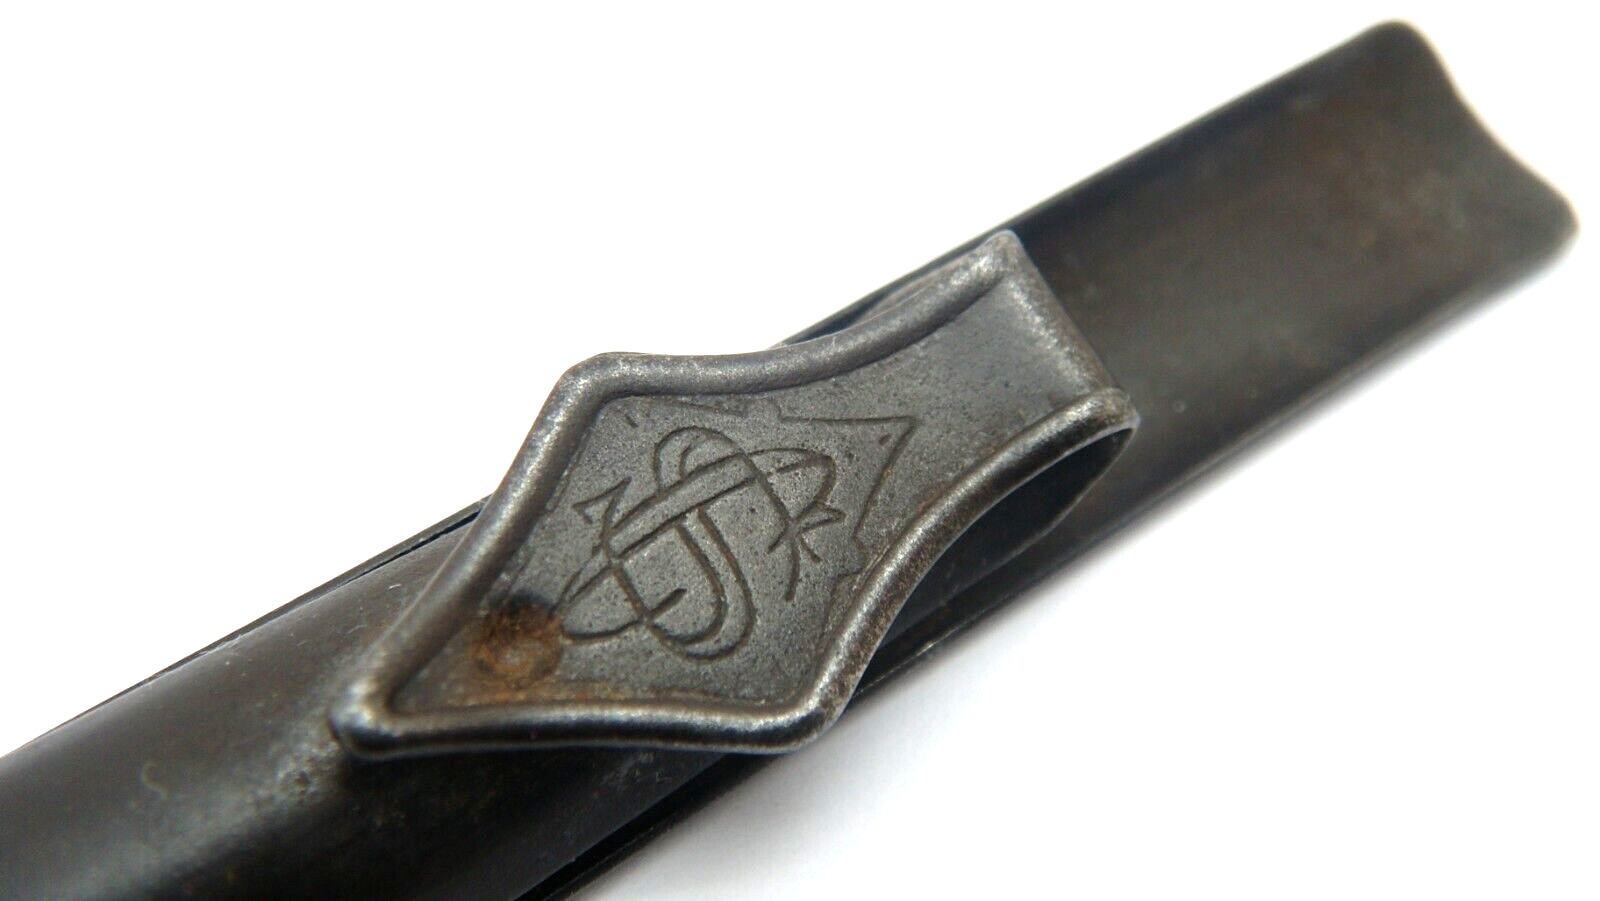 CONWAY STEWART METAL CLIP FOR FOUNTAIN PENS LONDON ENGLAND VERY RARE